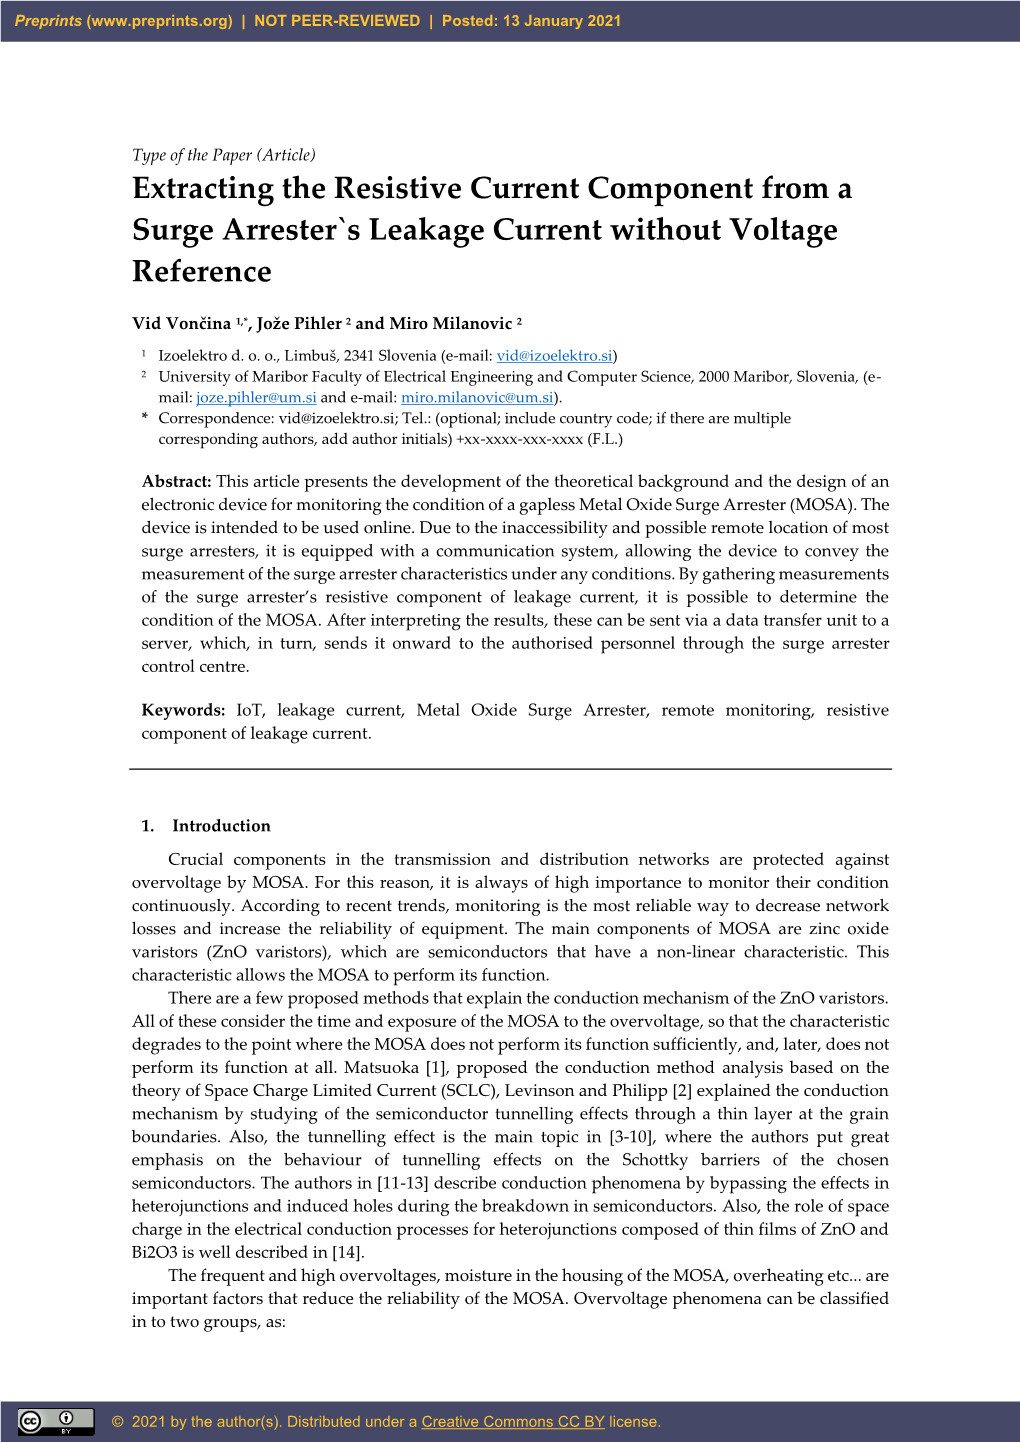 Extracting the Resistive Current Component from a Surge Arrester`S Leakage Current Without Voltage Reference